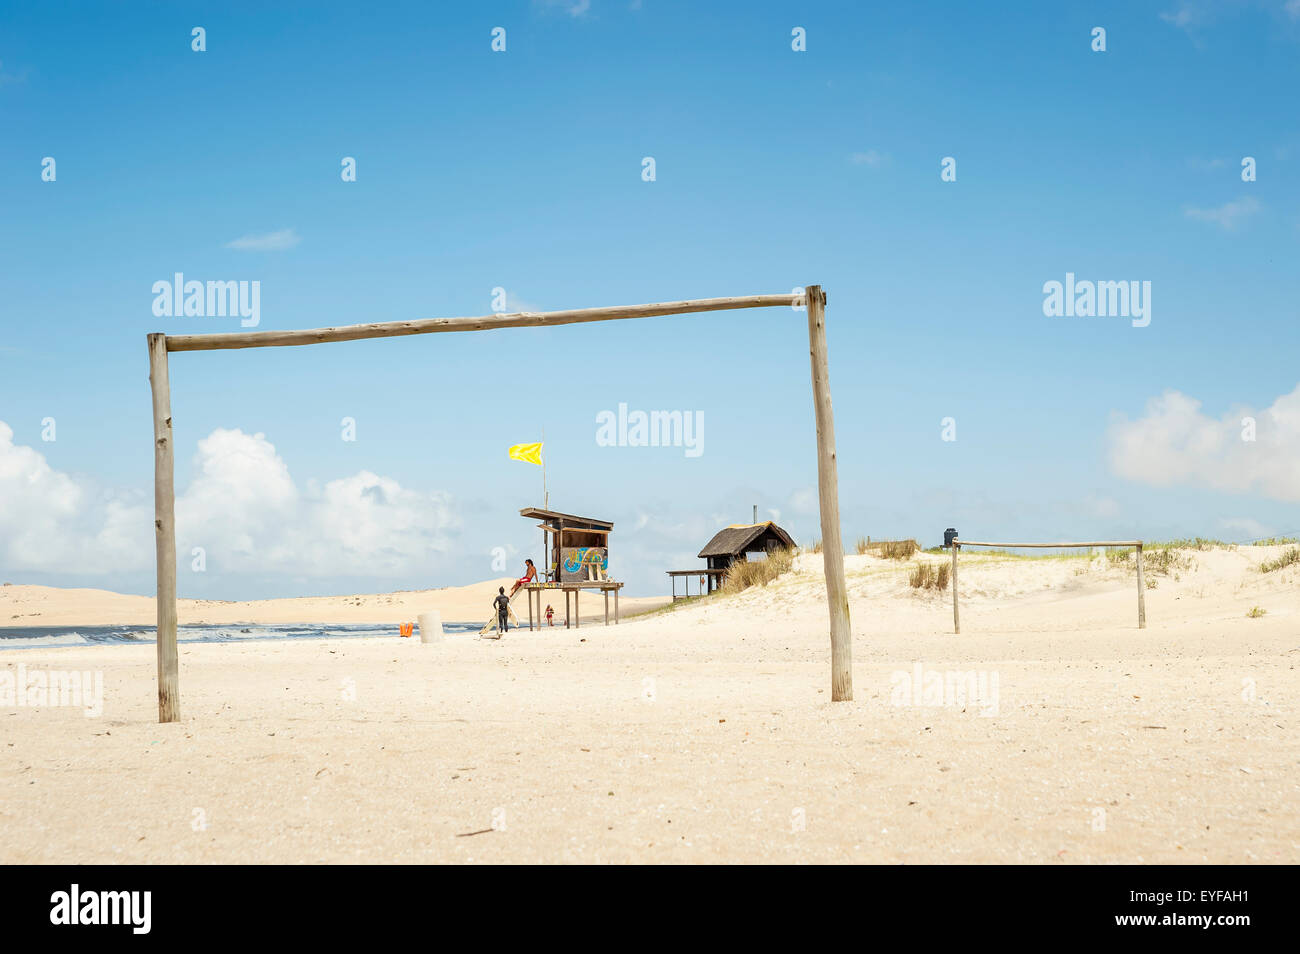 A wooden goal post on the beach with a lifeguard on duty in the background; Valizas, Uruguay Stock Photo